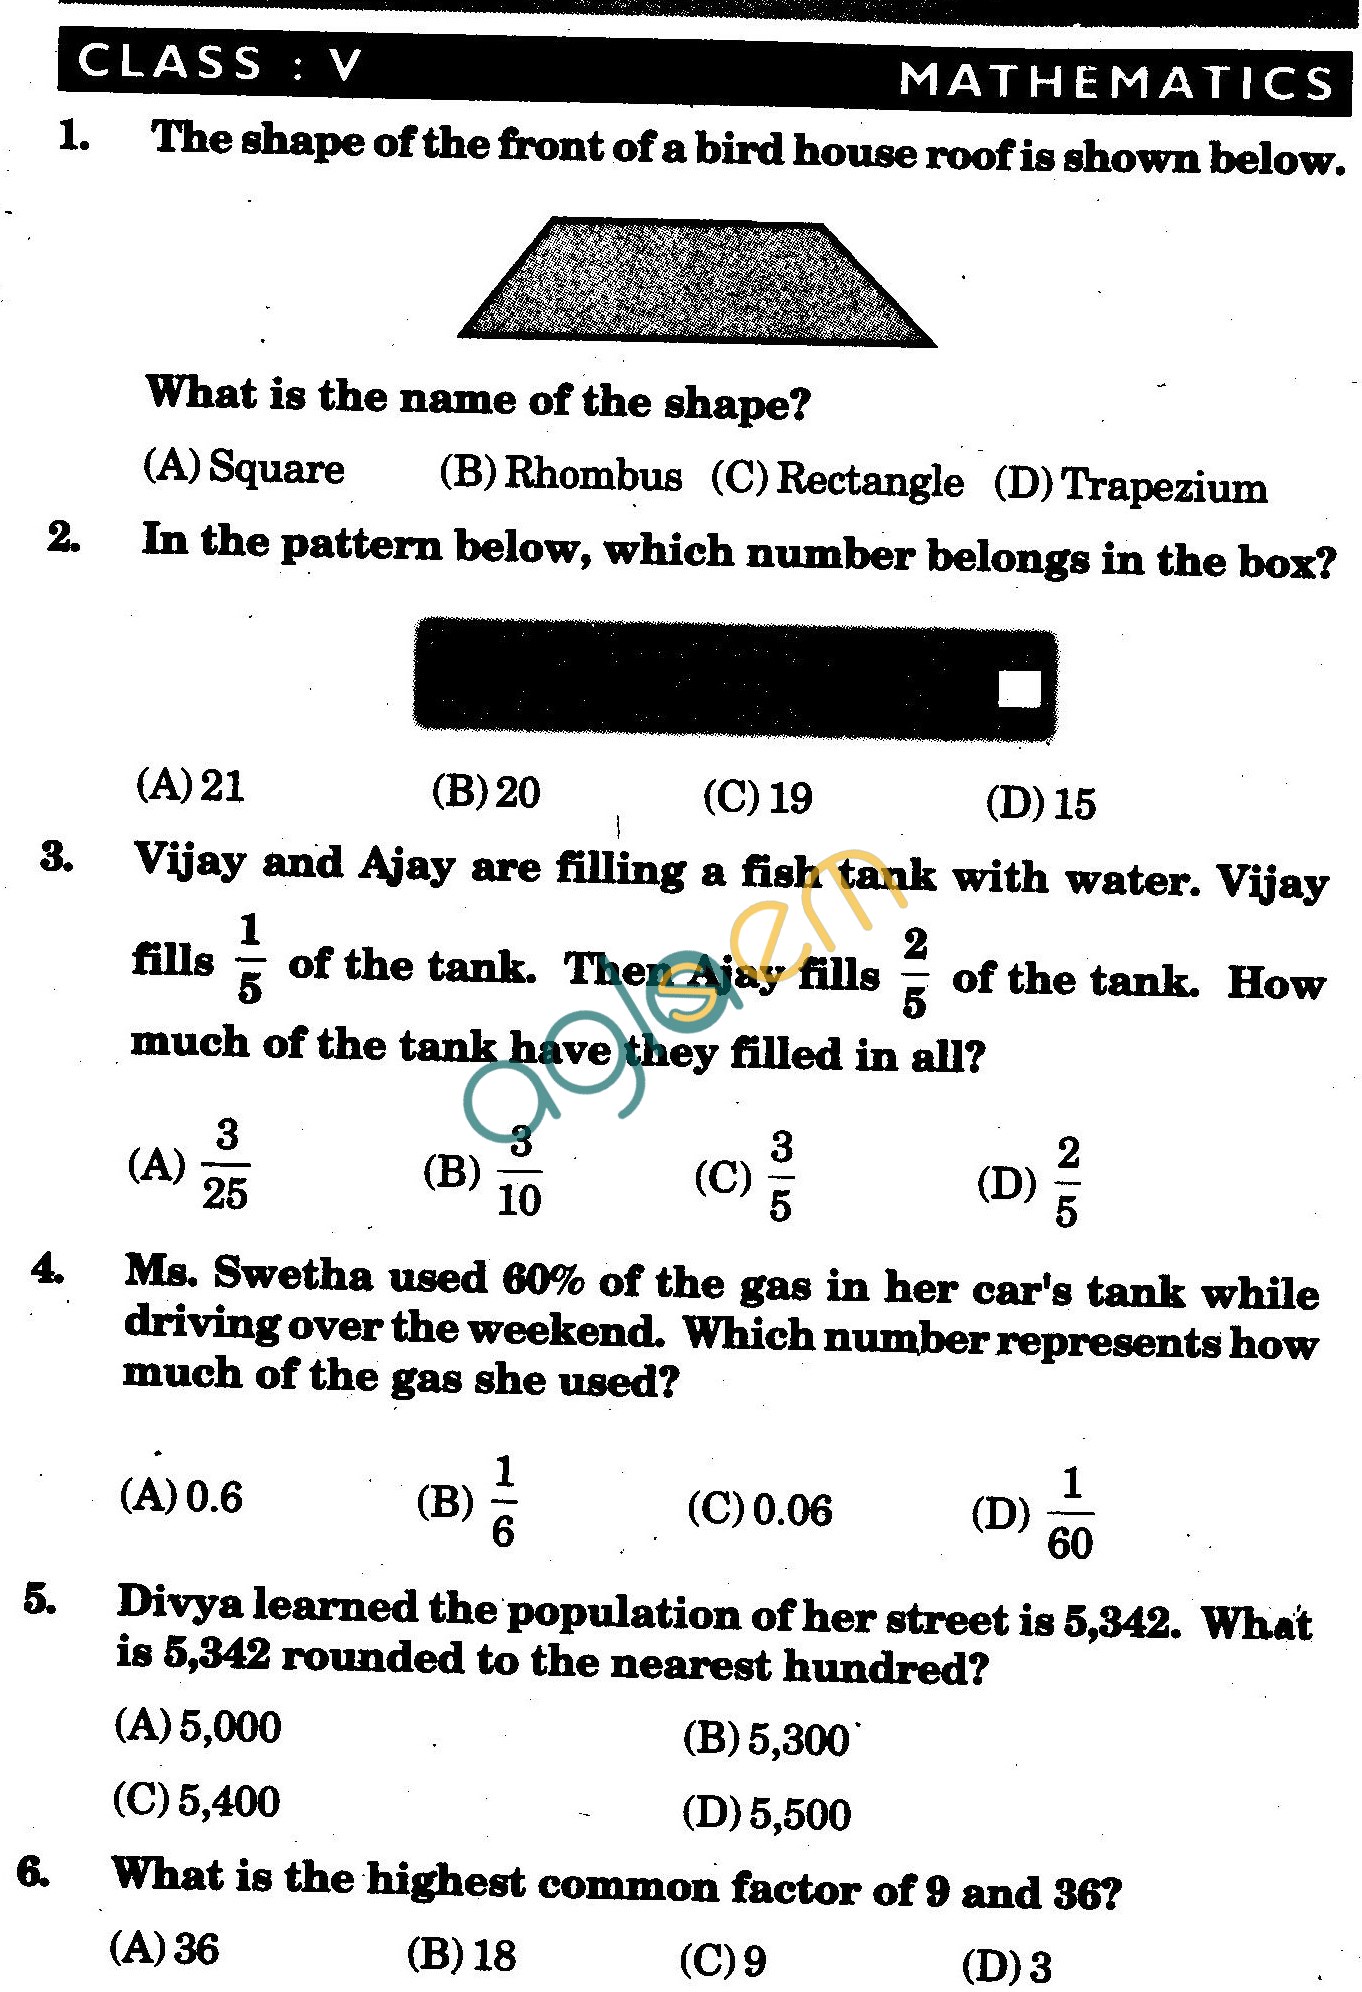 NSTSE 2009 Class V Question Paper with Answers - Mathematics